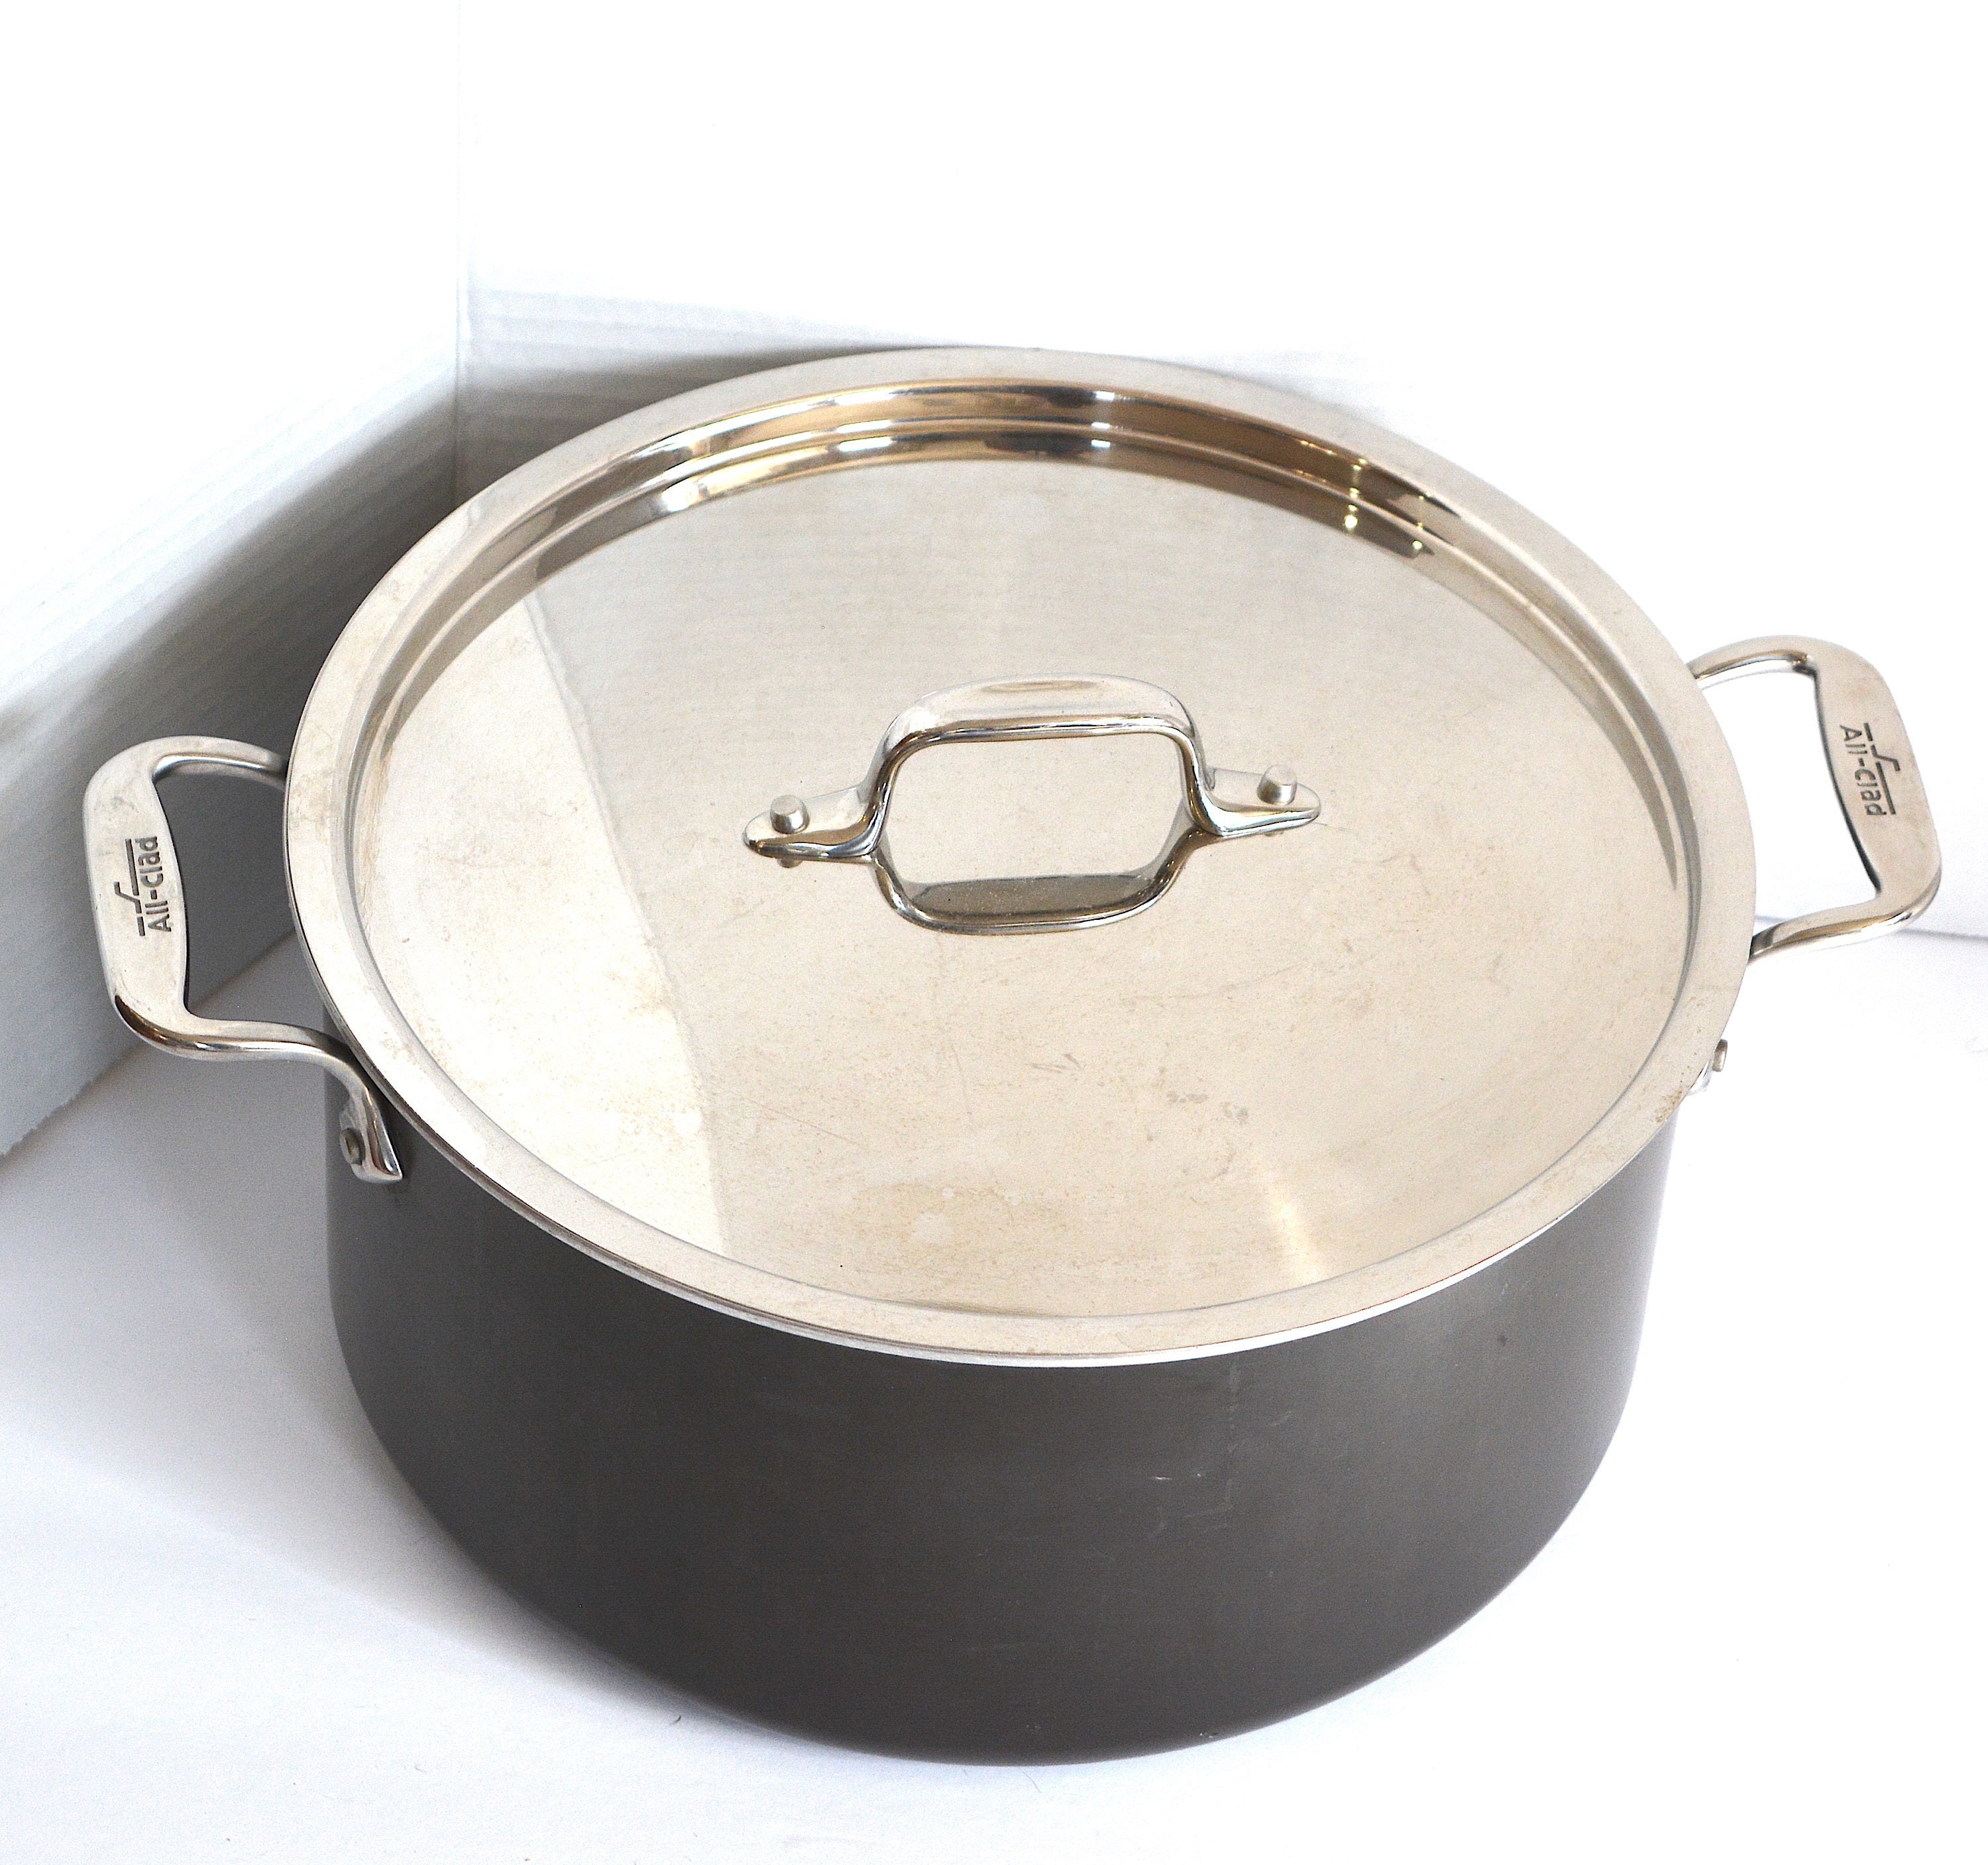 Emeril Hard-Anodized All-Clad Nonstick 1 Qt Saucepan with Lid